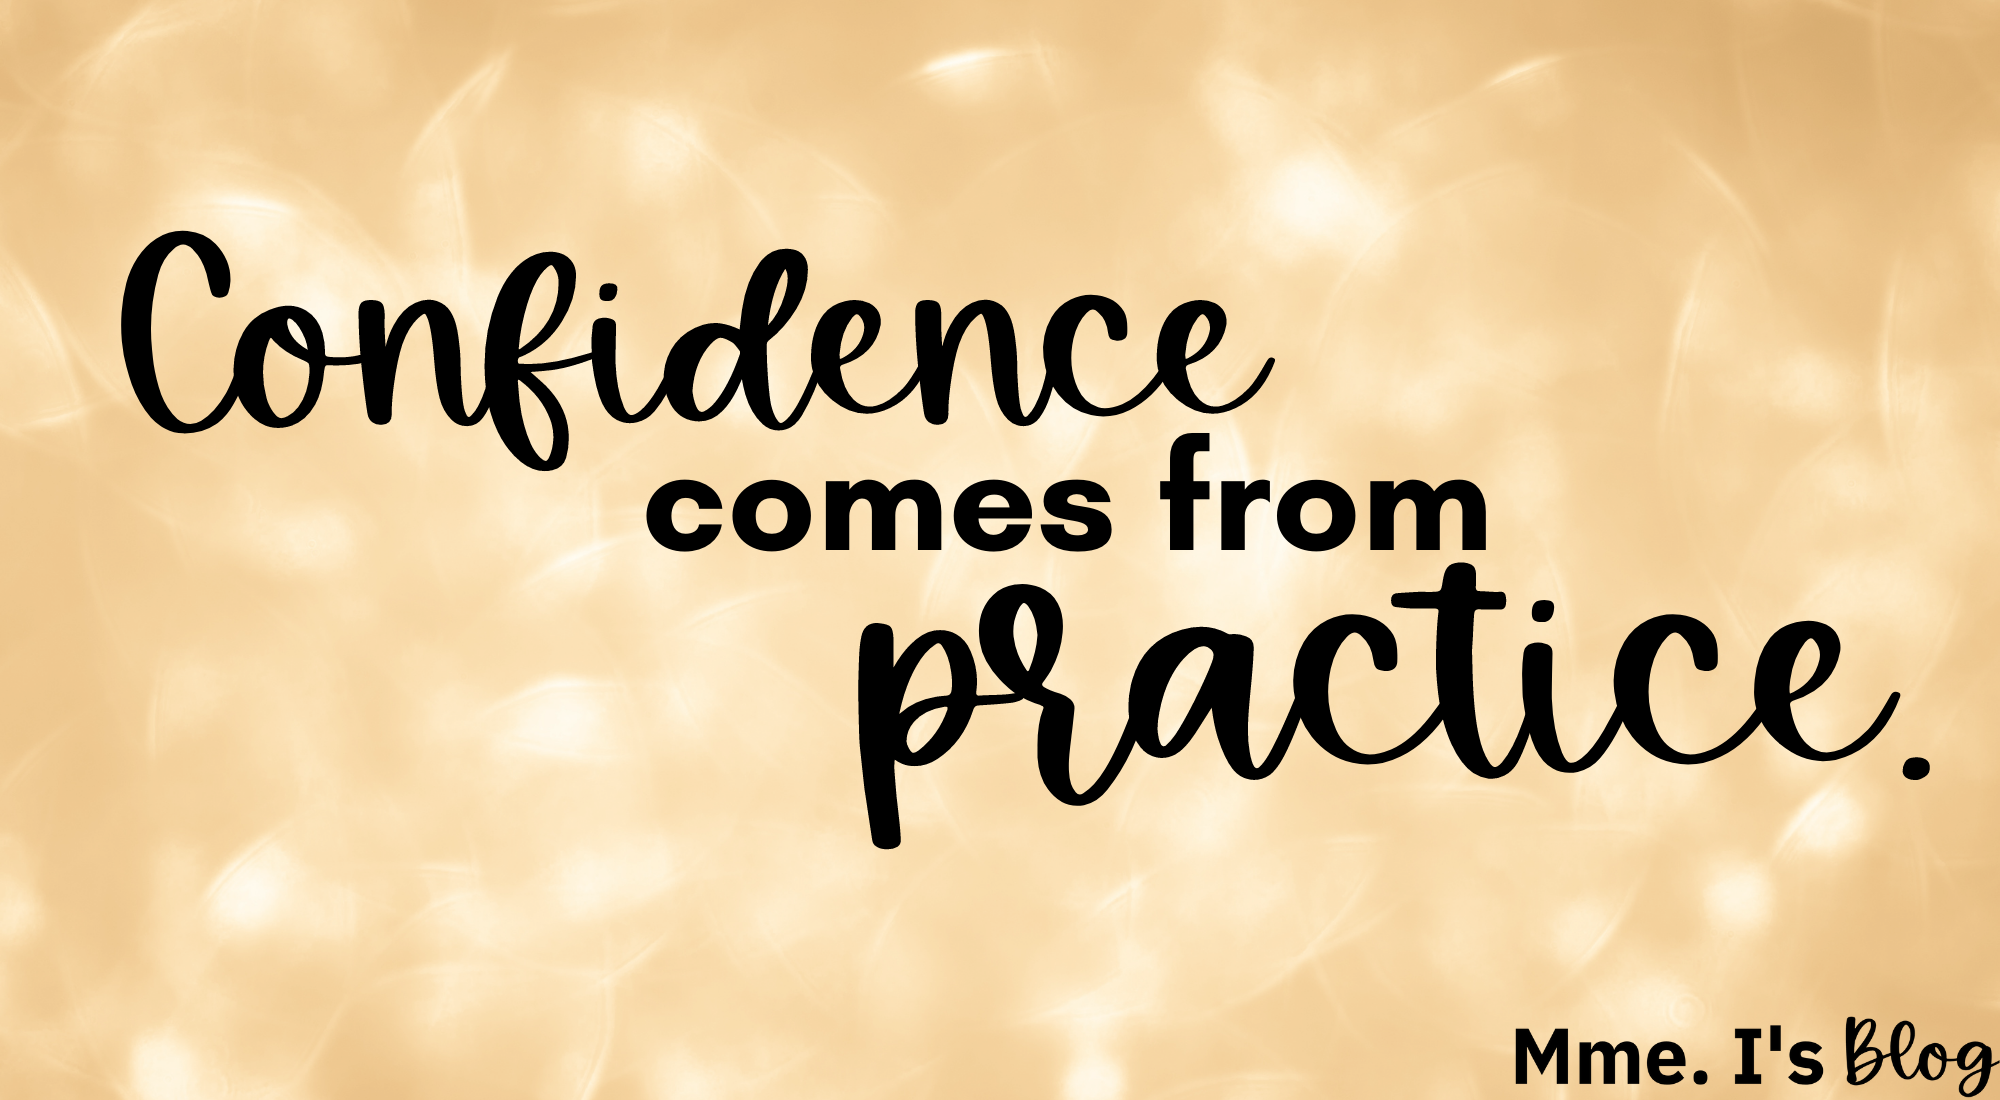 Confidence comes from practice